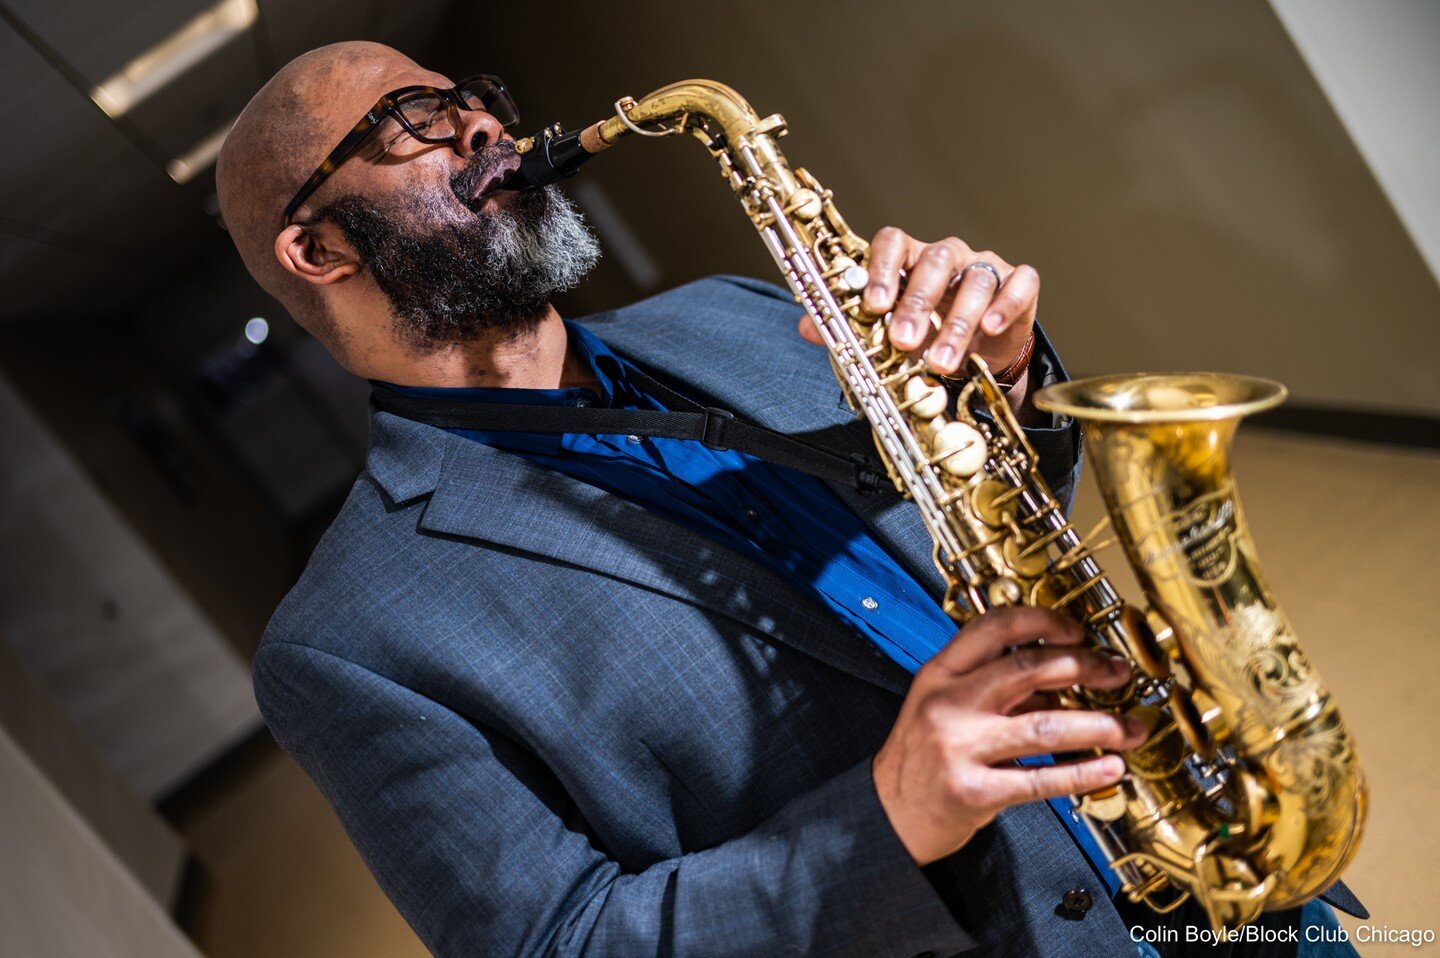 Hanging out with Frank Logan certainly was a highlight of my week. Hearing his story was incredibly inspiring, and his energy was equally motivating. // &quot;After 30-Year Break From School, This Sax-Playing South Side Grandpa Is Set To Graduate
Fra